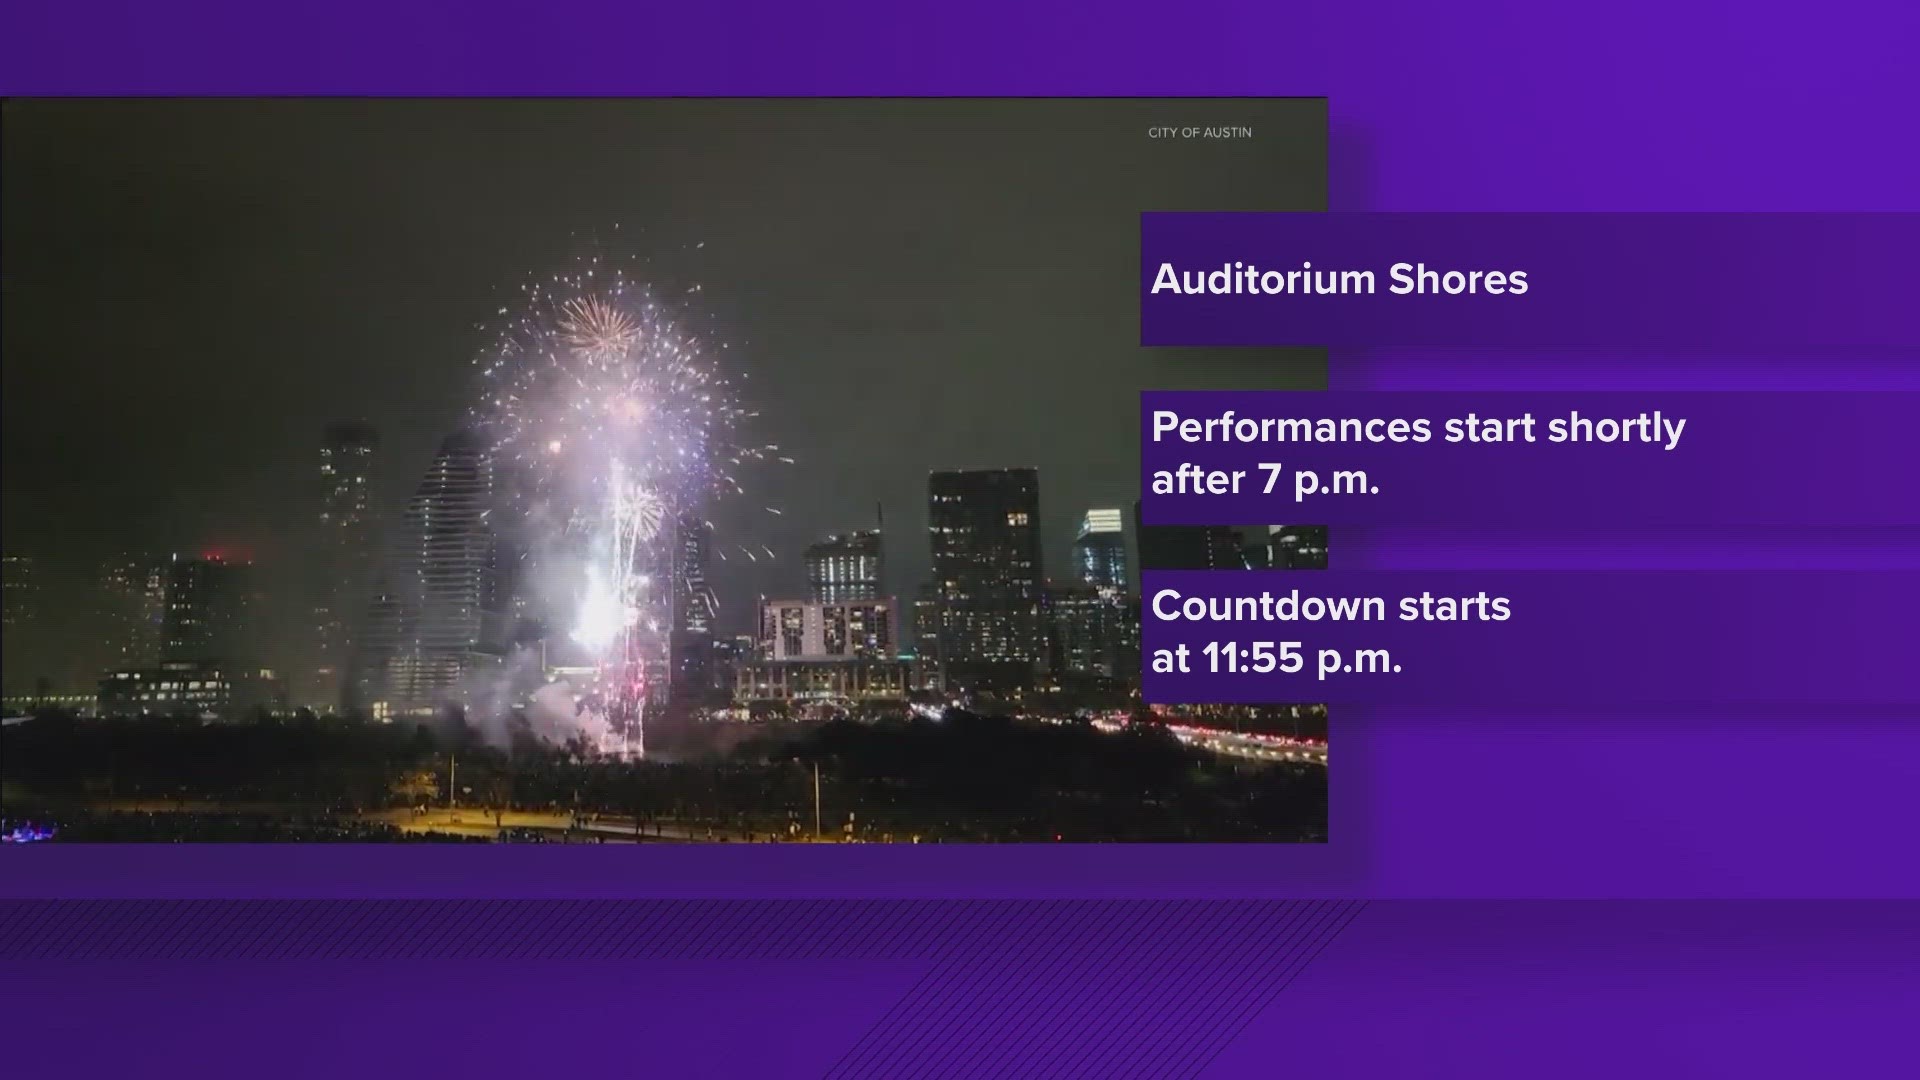 The City of Austin announced its New Year's Eve plans on Friday.